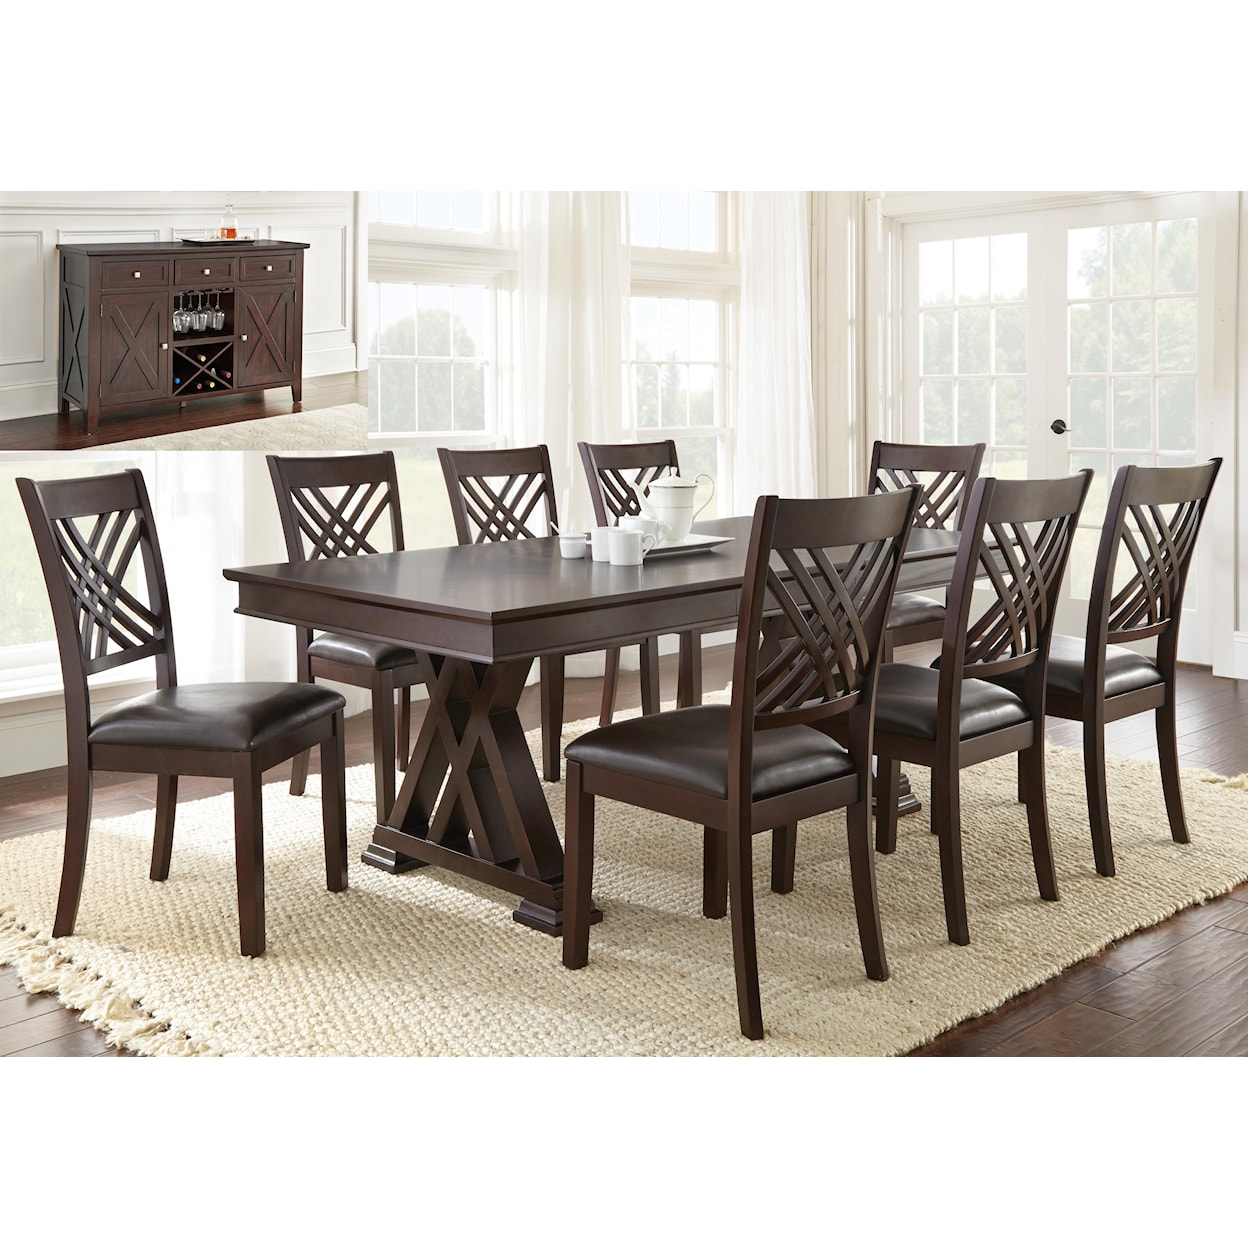 Steve Silver Adrian 8 Piece Table and Chair Set with Server